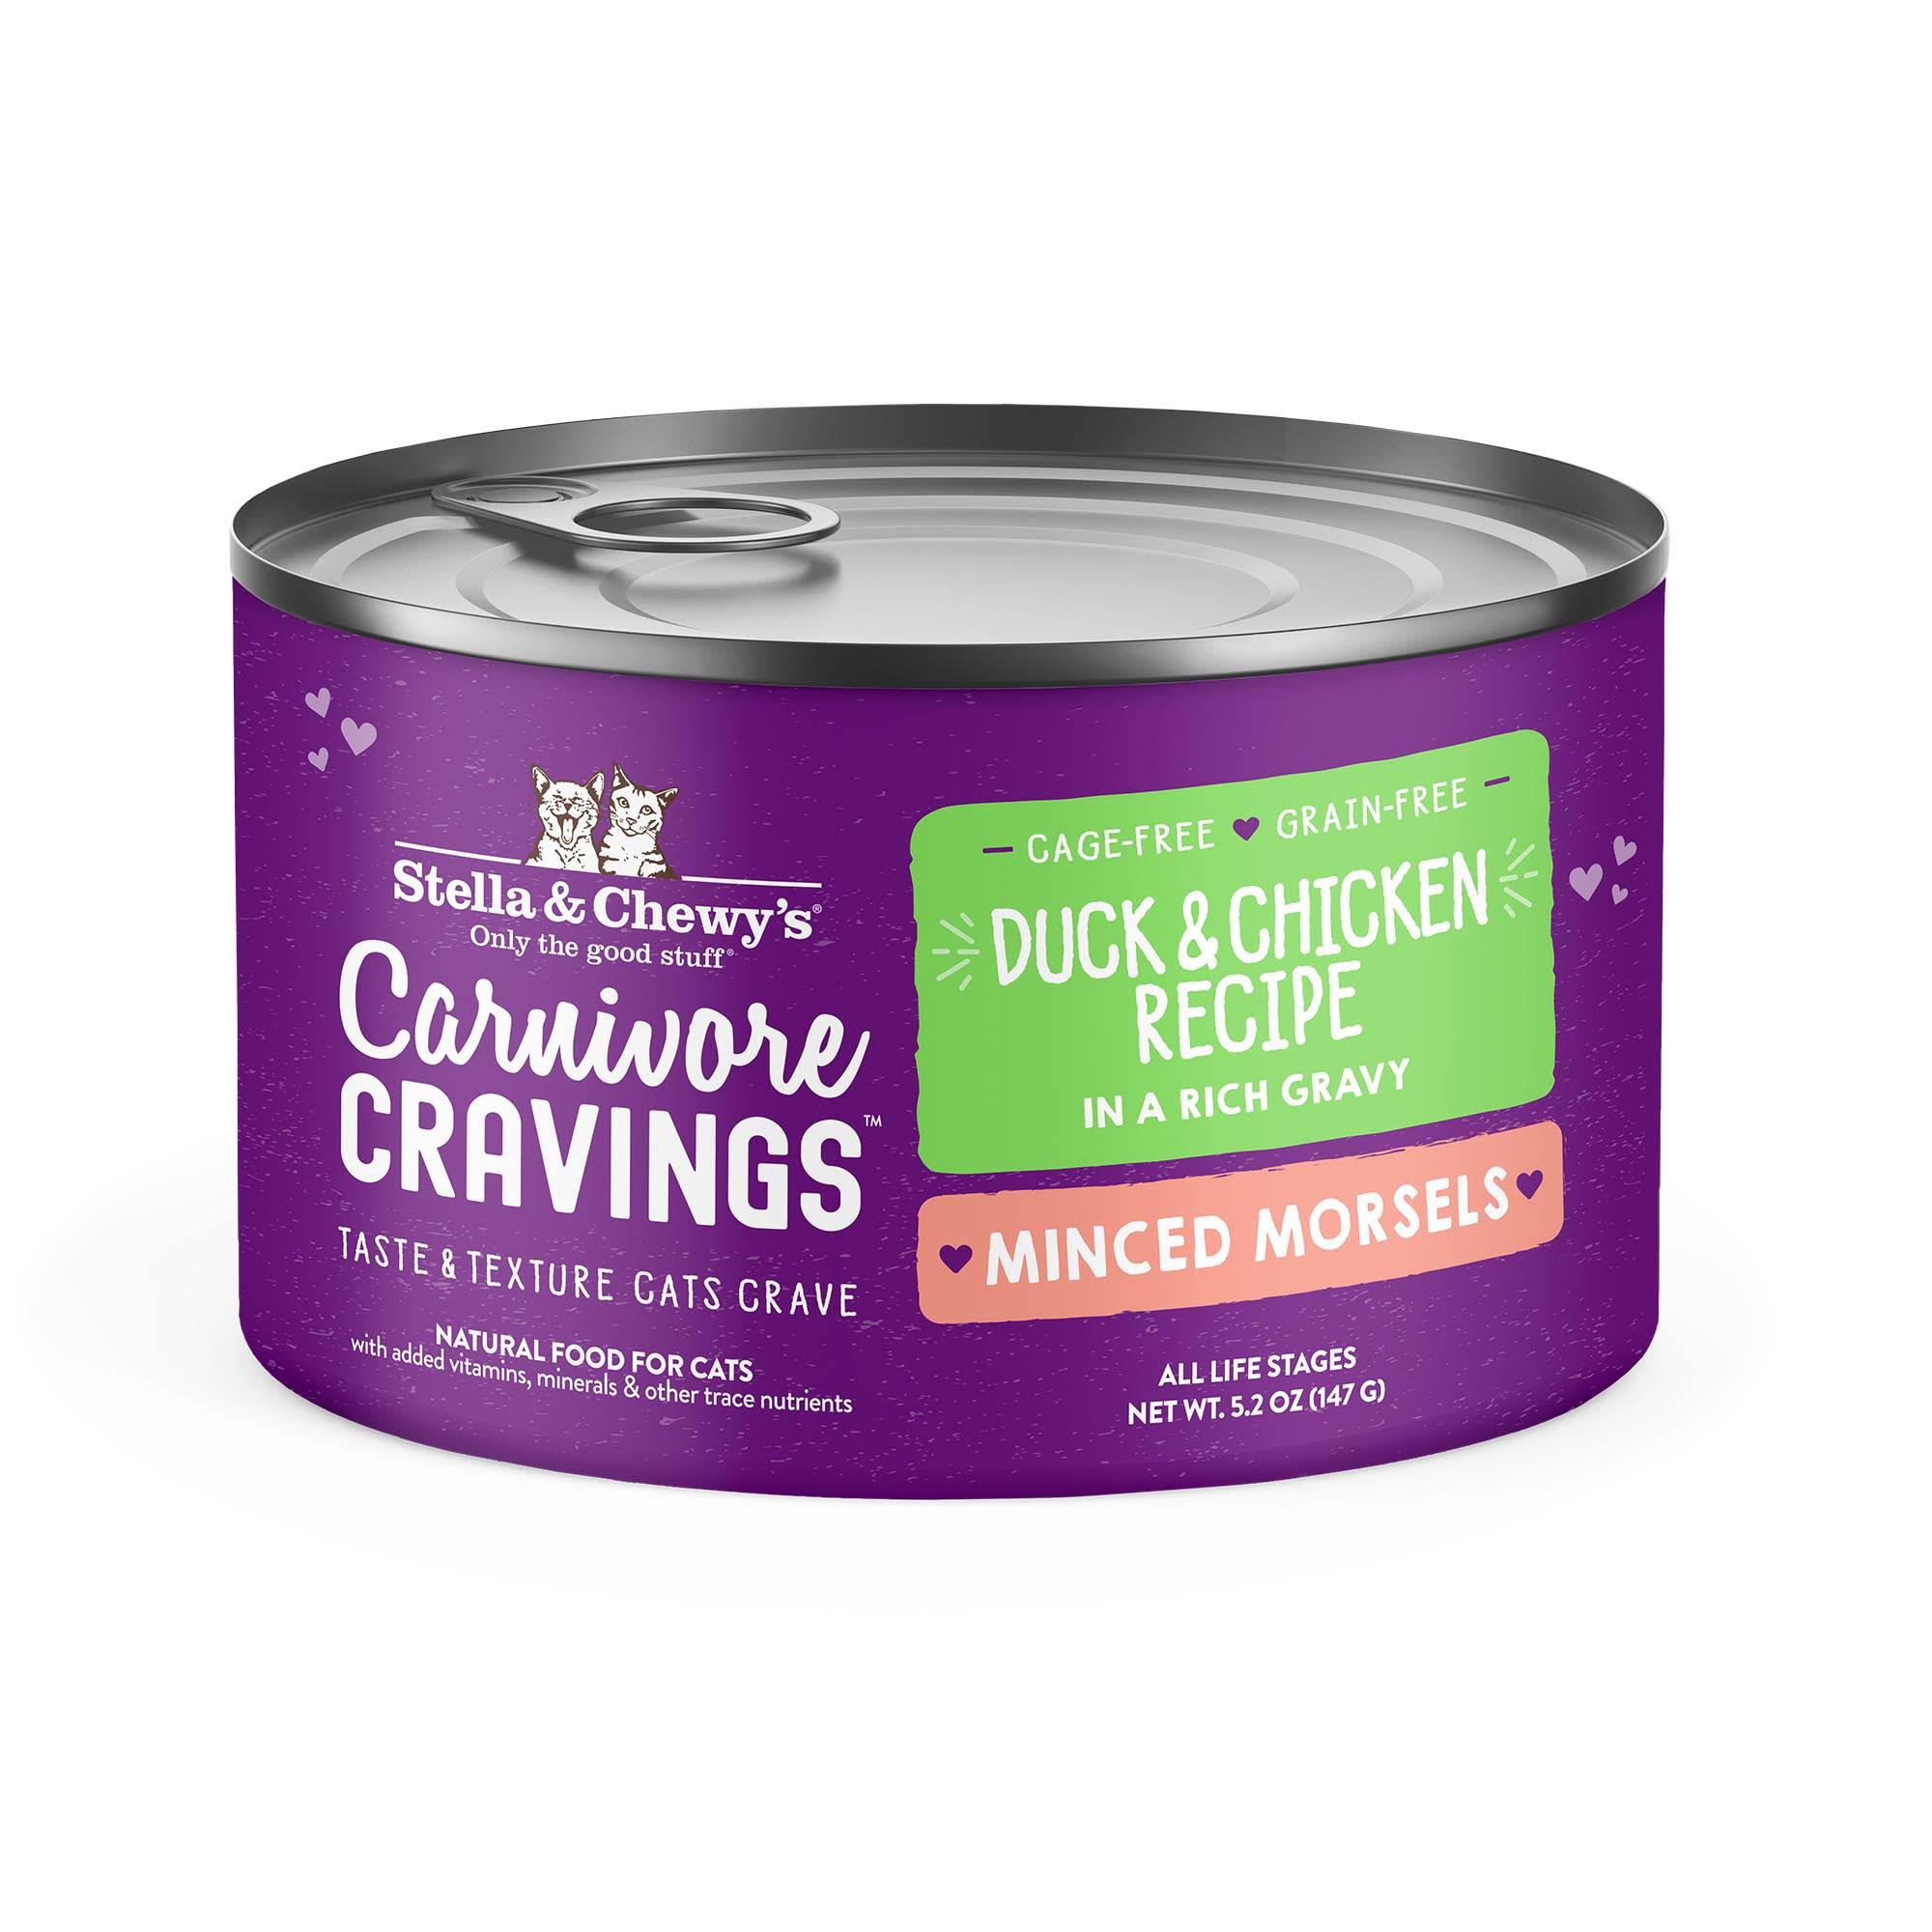 Stella & Chewy's Carnivore Cravings Minced Morsels Duck & Chicken Recipe Wet Cat Food, 5.2-Oz